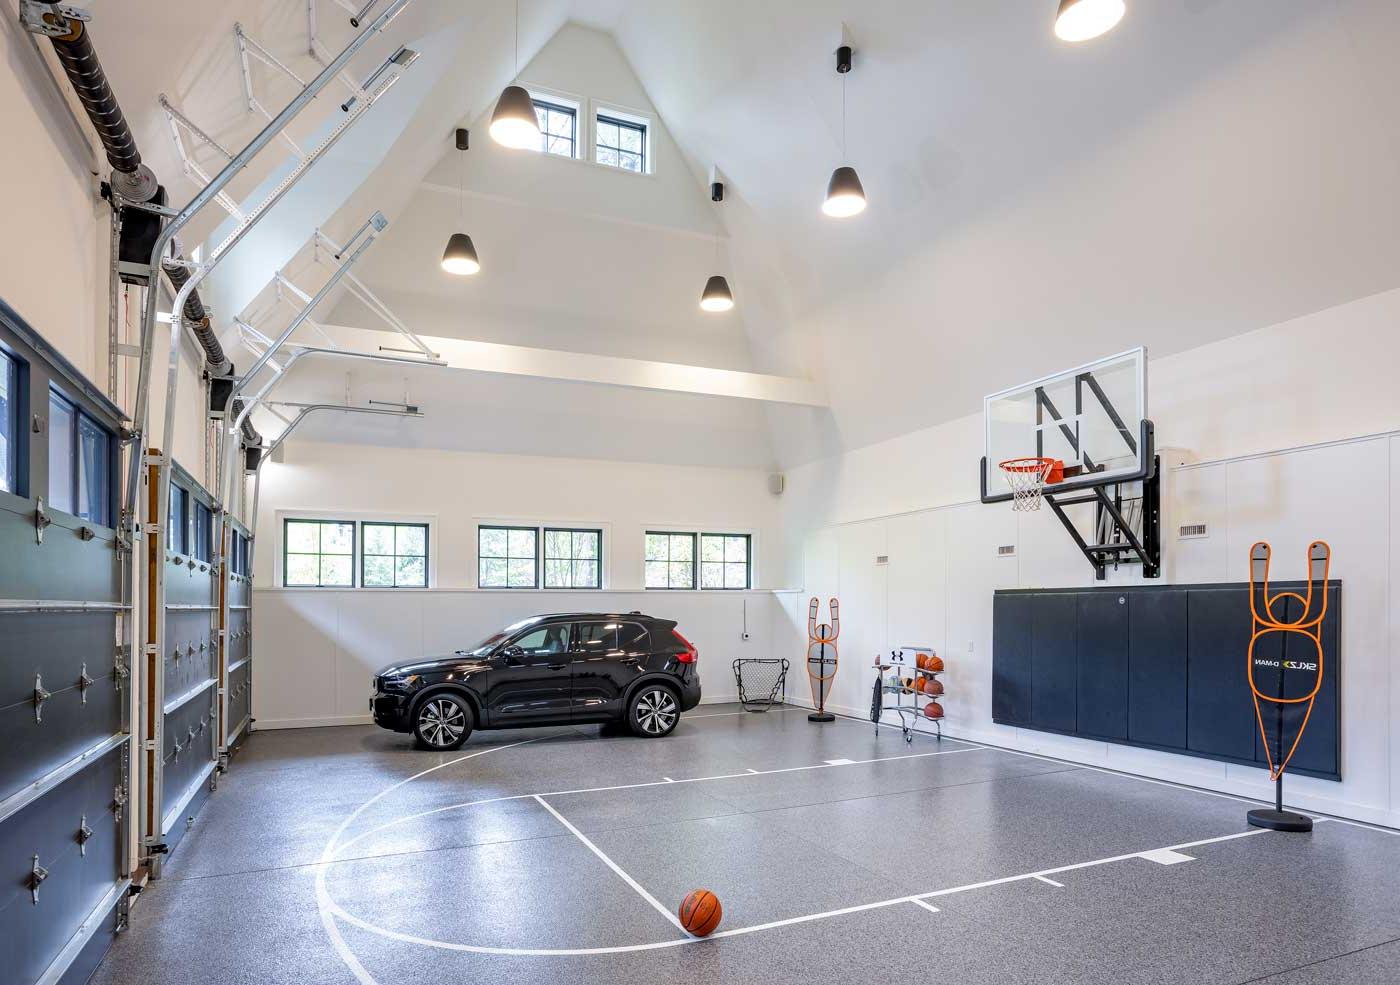 Shingle style home in rural wooded setting - 林奇建设 indoor basketball court and 3 car garage